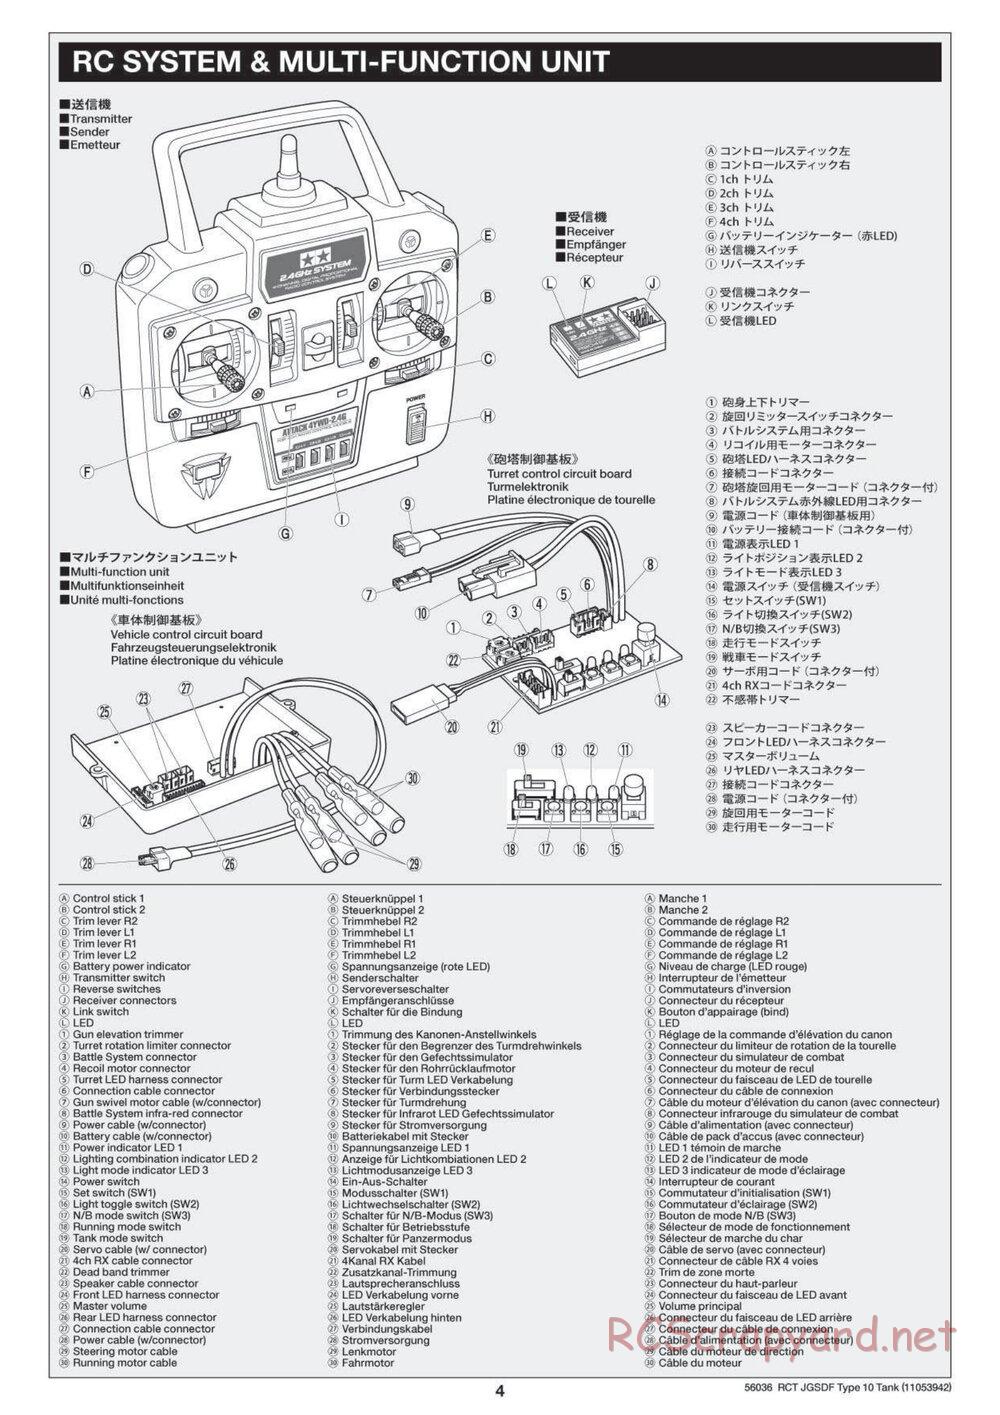 Tamiya - JGSDF Type 10 Tank - 1/16 Scale Chassis - Manual - Page 4